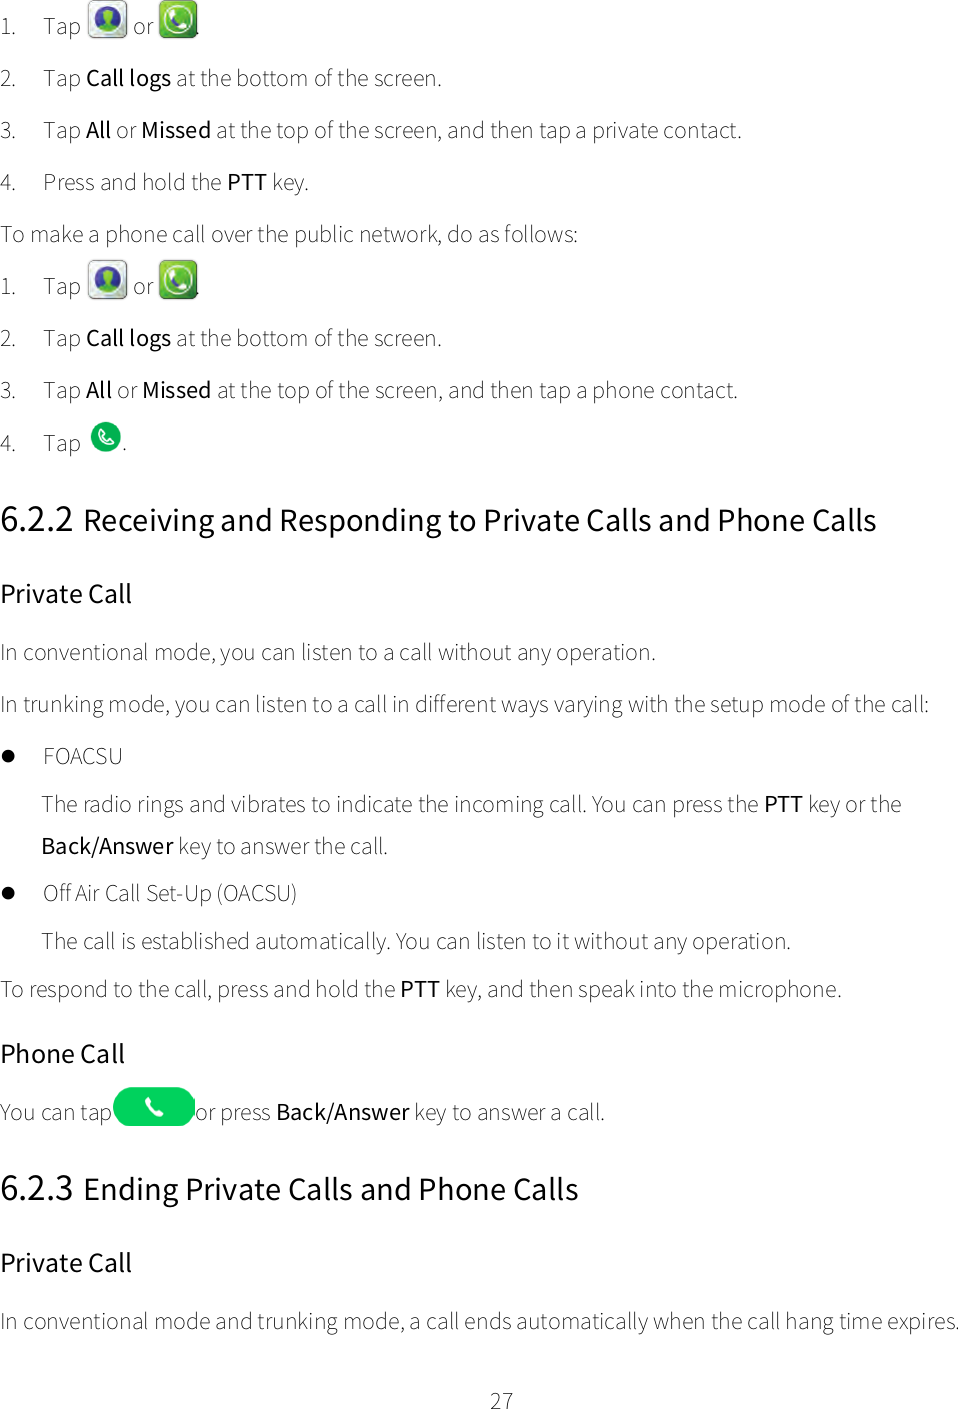    27  1. Tap    or  . 2. Tap Call logs at the bottom of the screen. 3. Tap All or Missed at the top of the screen, and then tap a private contact. 4. Press and hold the PTT key. To make a phone call over the public network, do as follows: 1. Tap  or  . 2. Tap Call logs at the bottom of the screen. 3. Tap All or Missed at the top of the screen, and then tap a phone contact. 4. Tap  . 6.2.2 Receiving and Responding to Private Calls and Phone Calls   Private Call In conventional mode, you can listen to a call without any operation.   In trunking mode, you can listen to a call in different ways varying with the setup mode of the call:  FOACSU The radio rings and vibrates to indicate the incoming call. You can press the PTT key or the Back/Answer key to answer the call.  Off Air Call Set-Up (OACSU) The call is established automatically. You can listen to it without any operation. To respond to the call, press and hold the PTT key, and then speak into the microphone. Phone Call You can tap   or press Back/Answer key to answer a call. 6.2.3 Ending Private Calls and Phone Calls Private Call In conventional mode and trunking mode, a call ends automatically when the call hang time expires. 